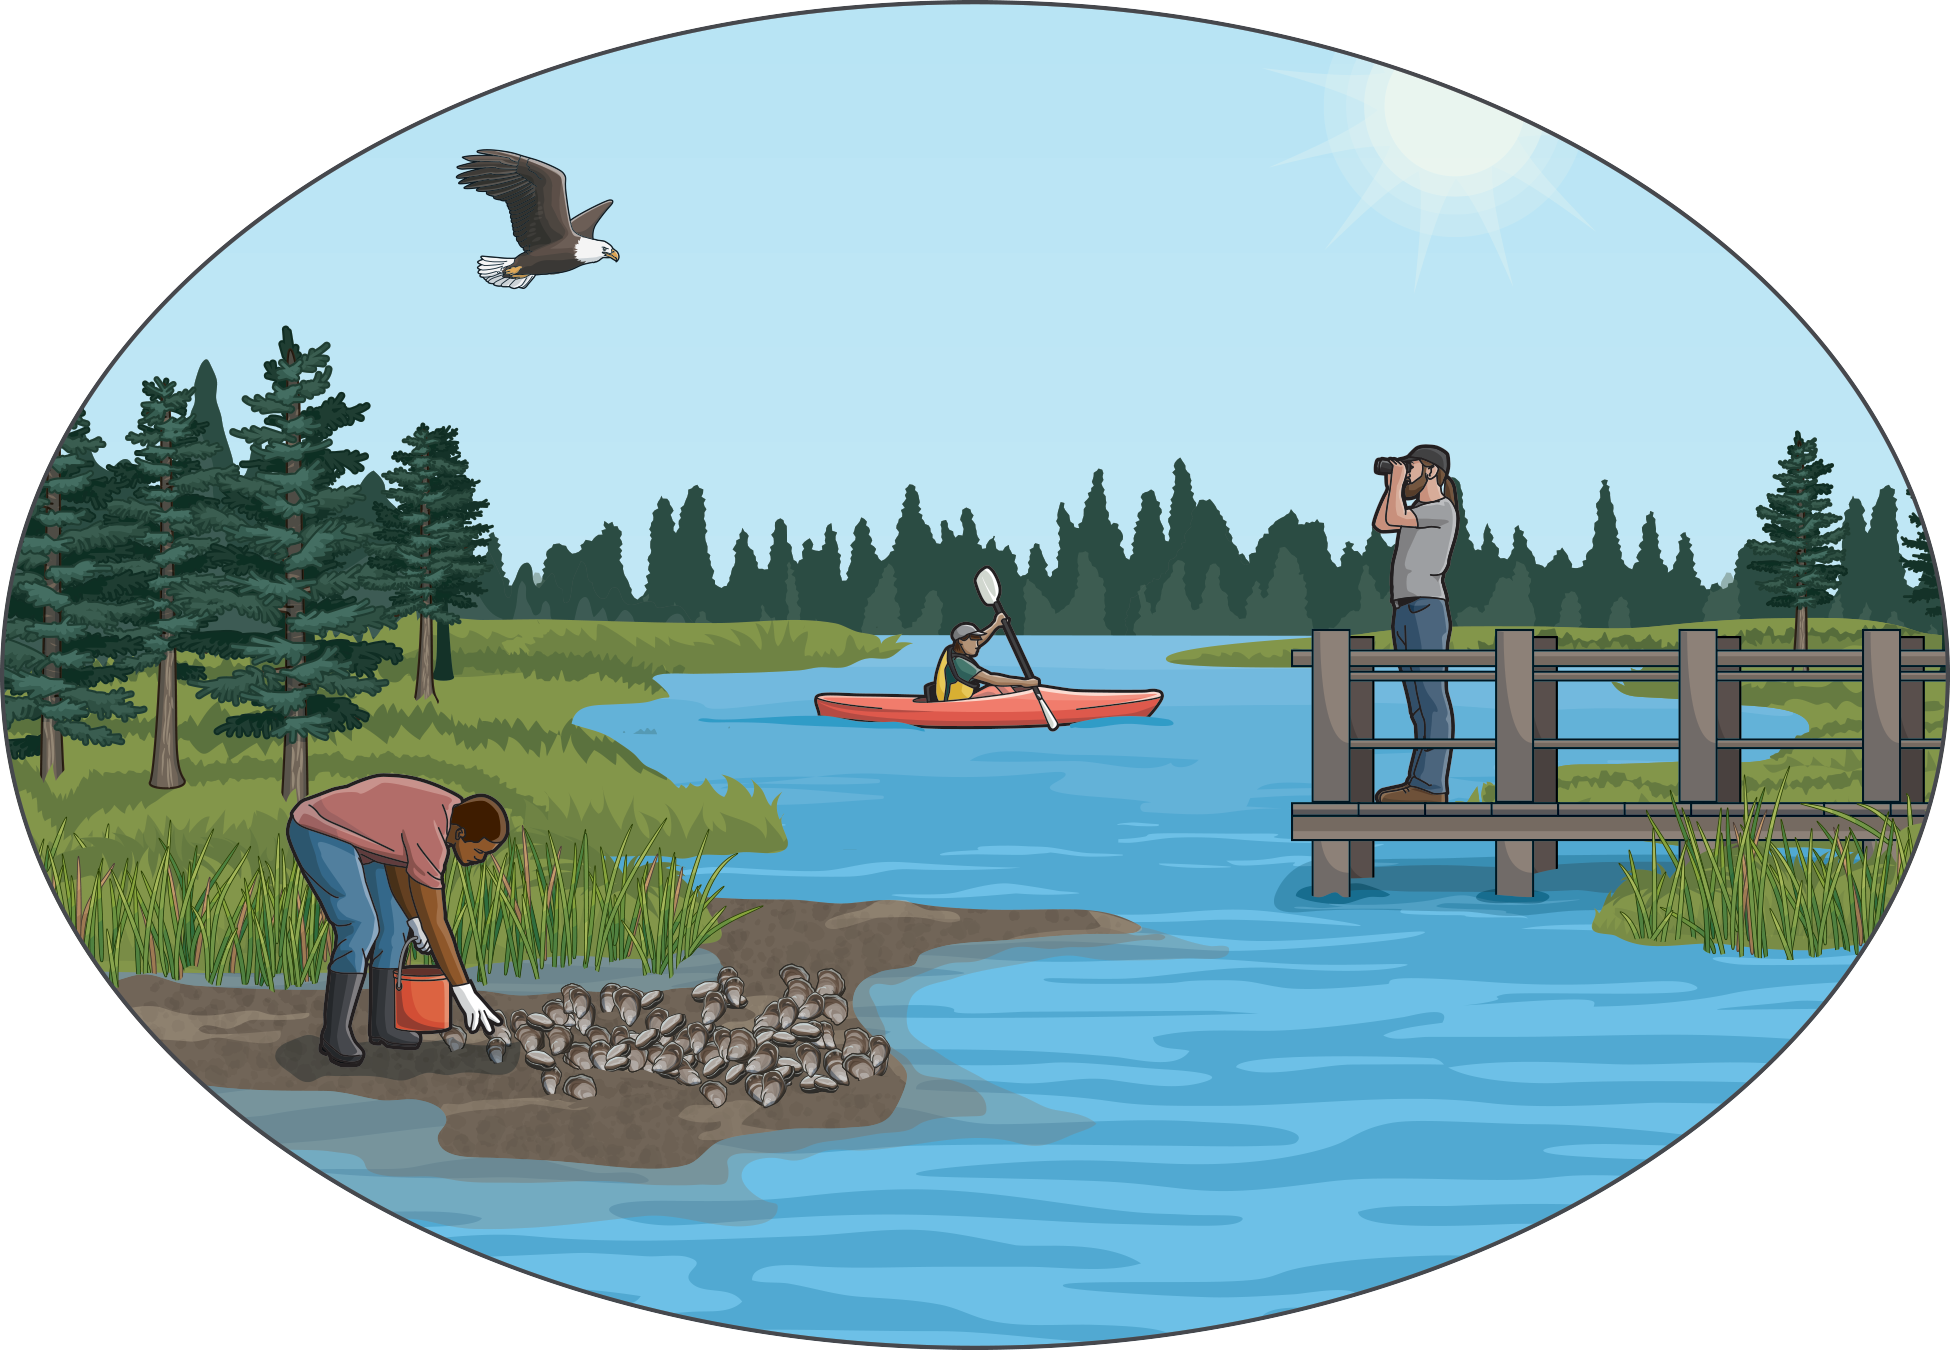 An illustration of a kayaker and a bird watcher on a river.